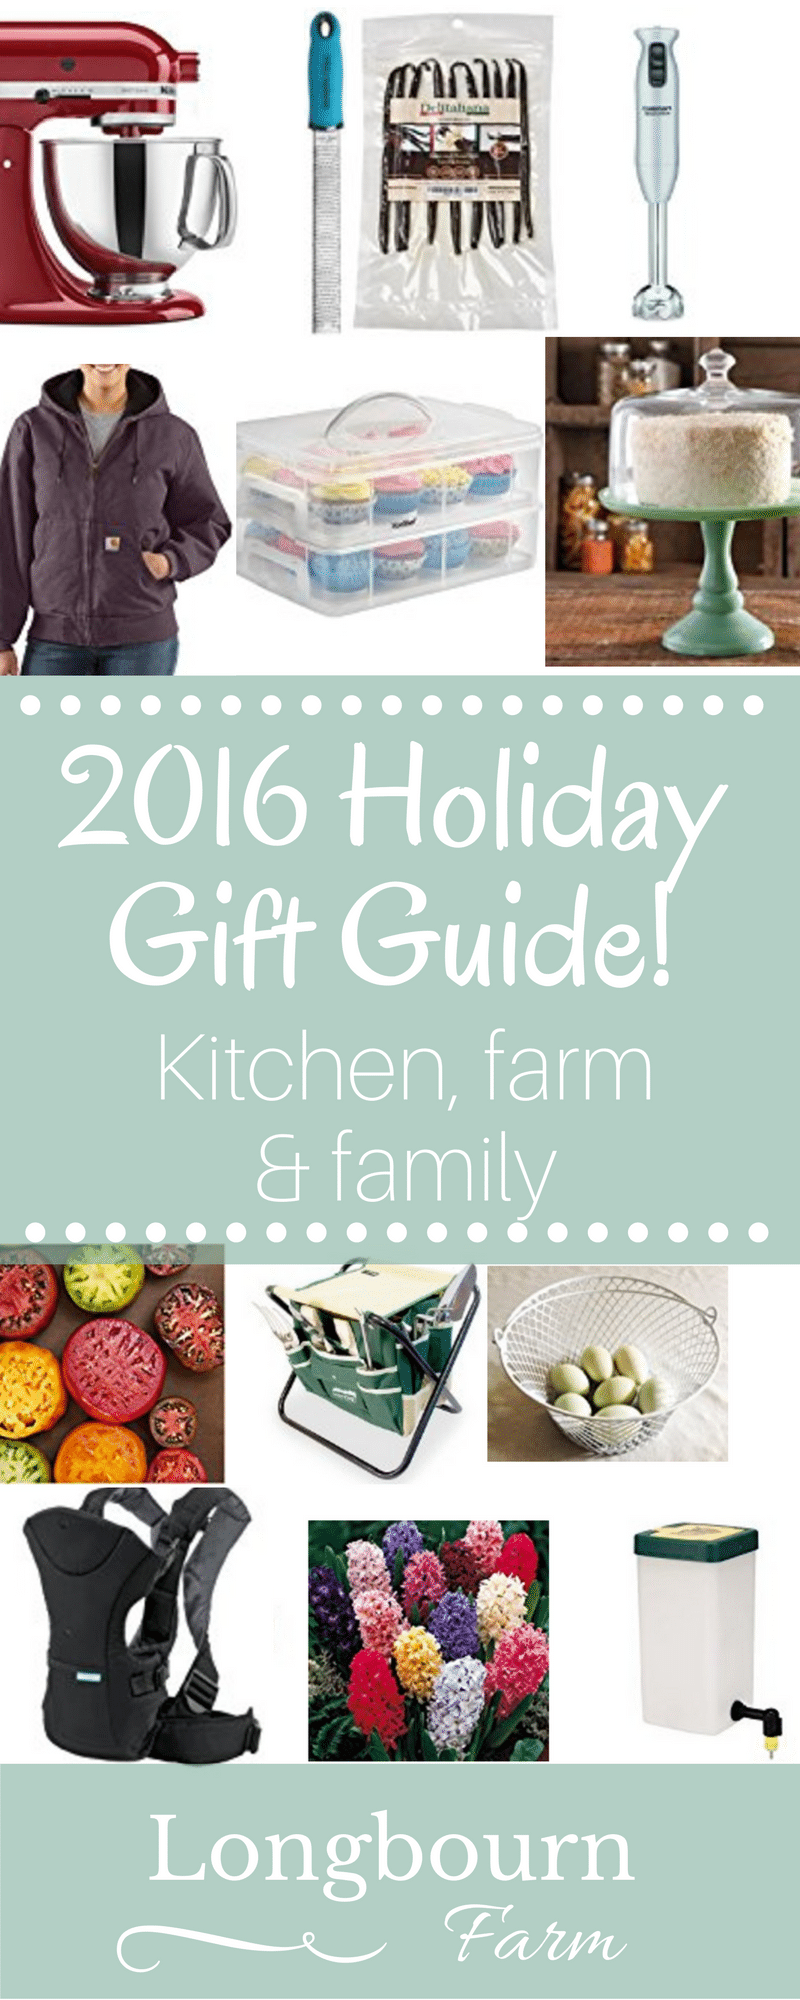 Get the perfect gift for the kitchen, farm or family person in your life! Longbourn Farm's 2016 Holiday Gift Guide is the perfect spot to shop for ideas.